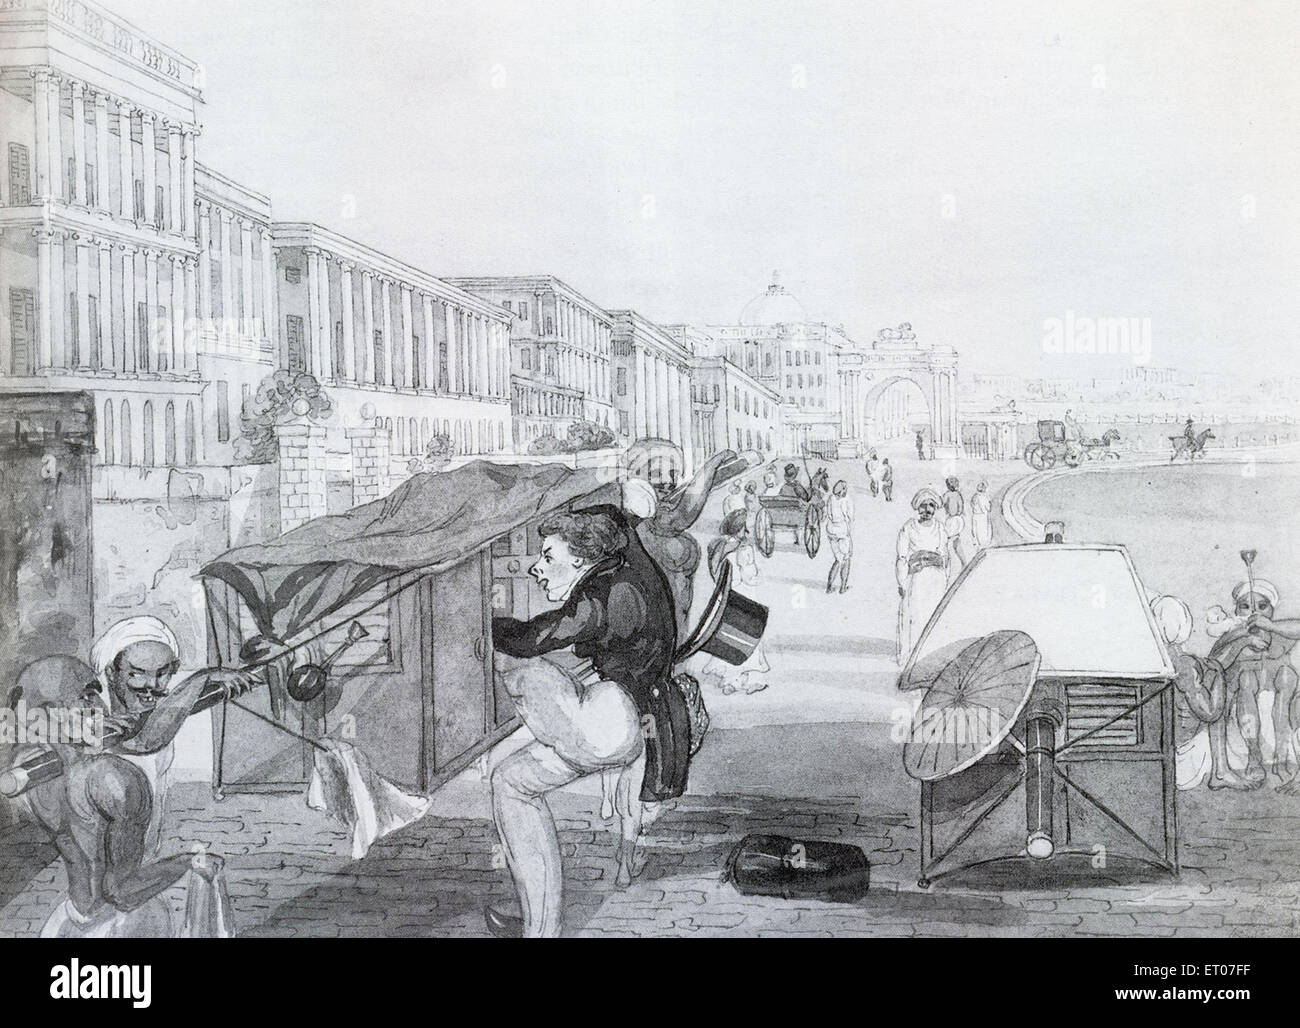 Inexperienced palanquin rider, Tom Raw hiring palanquin on Esplanade, Calcutta, Kolkata, West Bengal, India, Asia by Sir Charles D'Oyly, 1781- 1845 Stock Photo